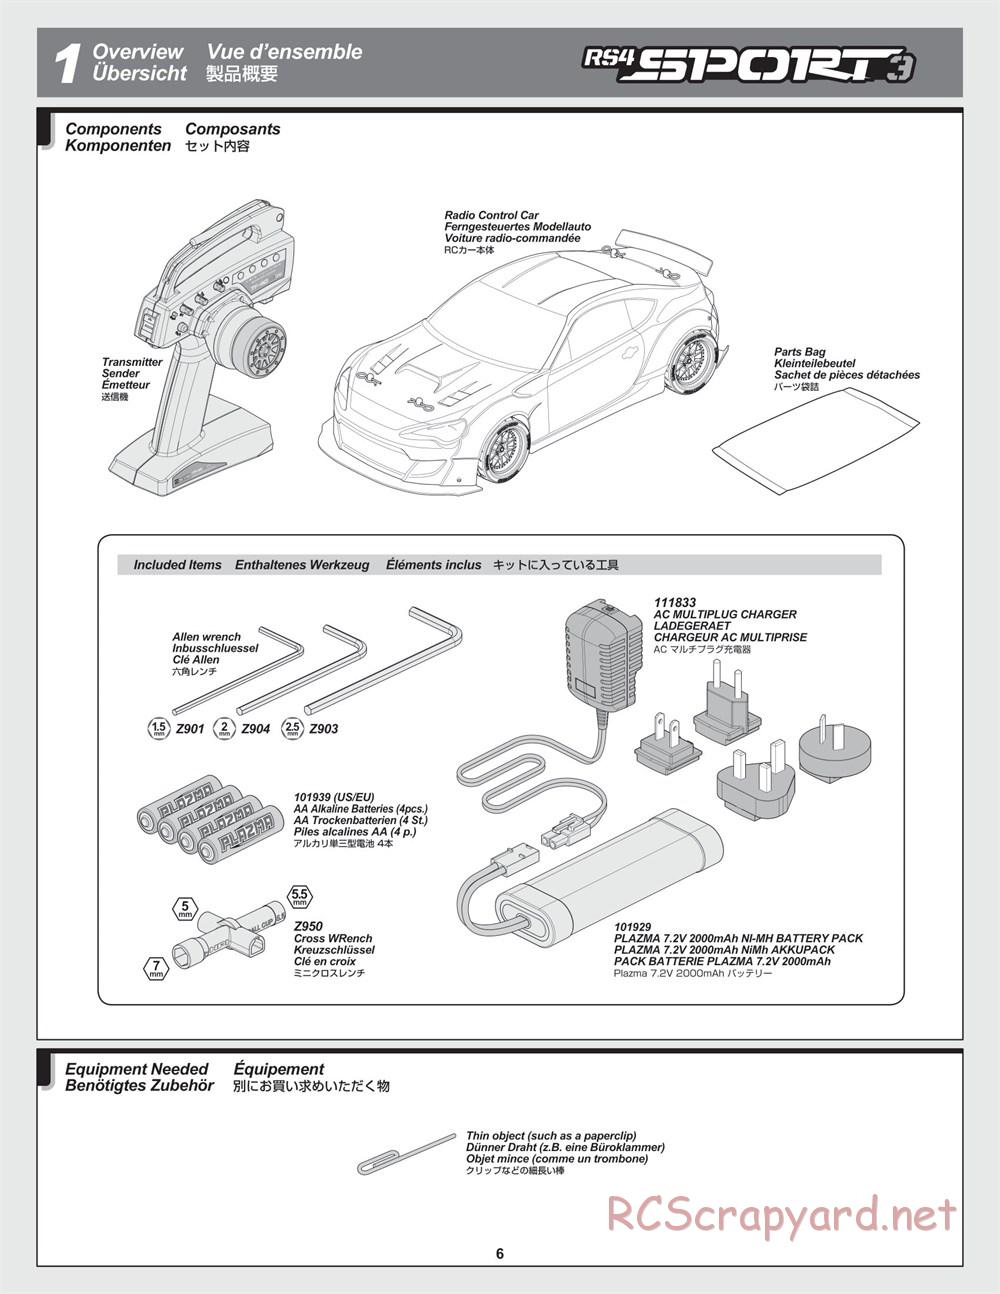 HPI - RS4 Sport 3 - Manual - Page 6